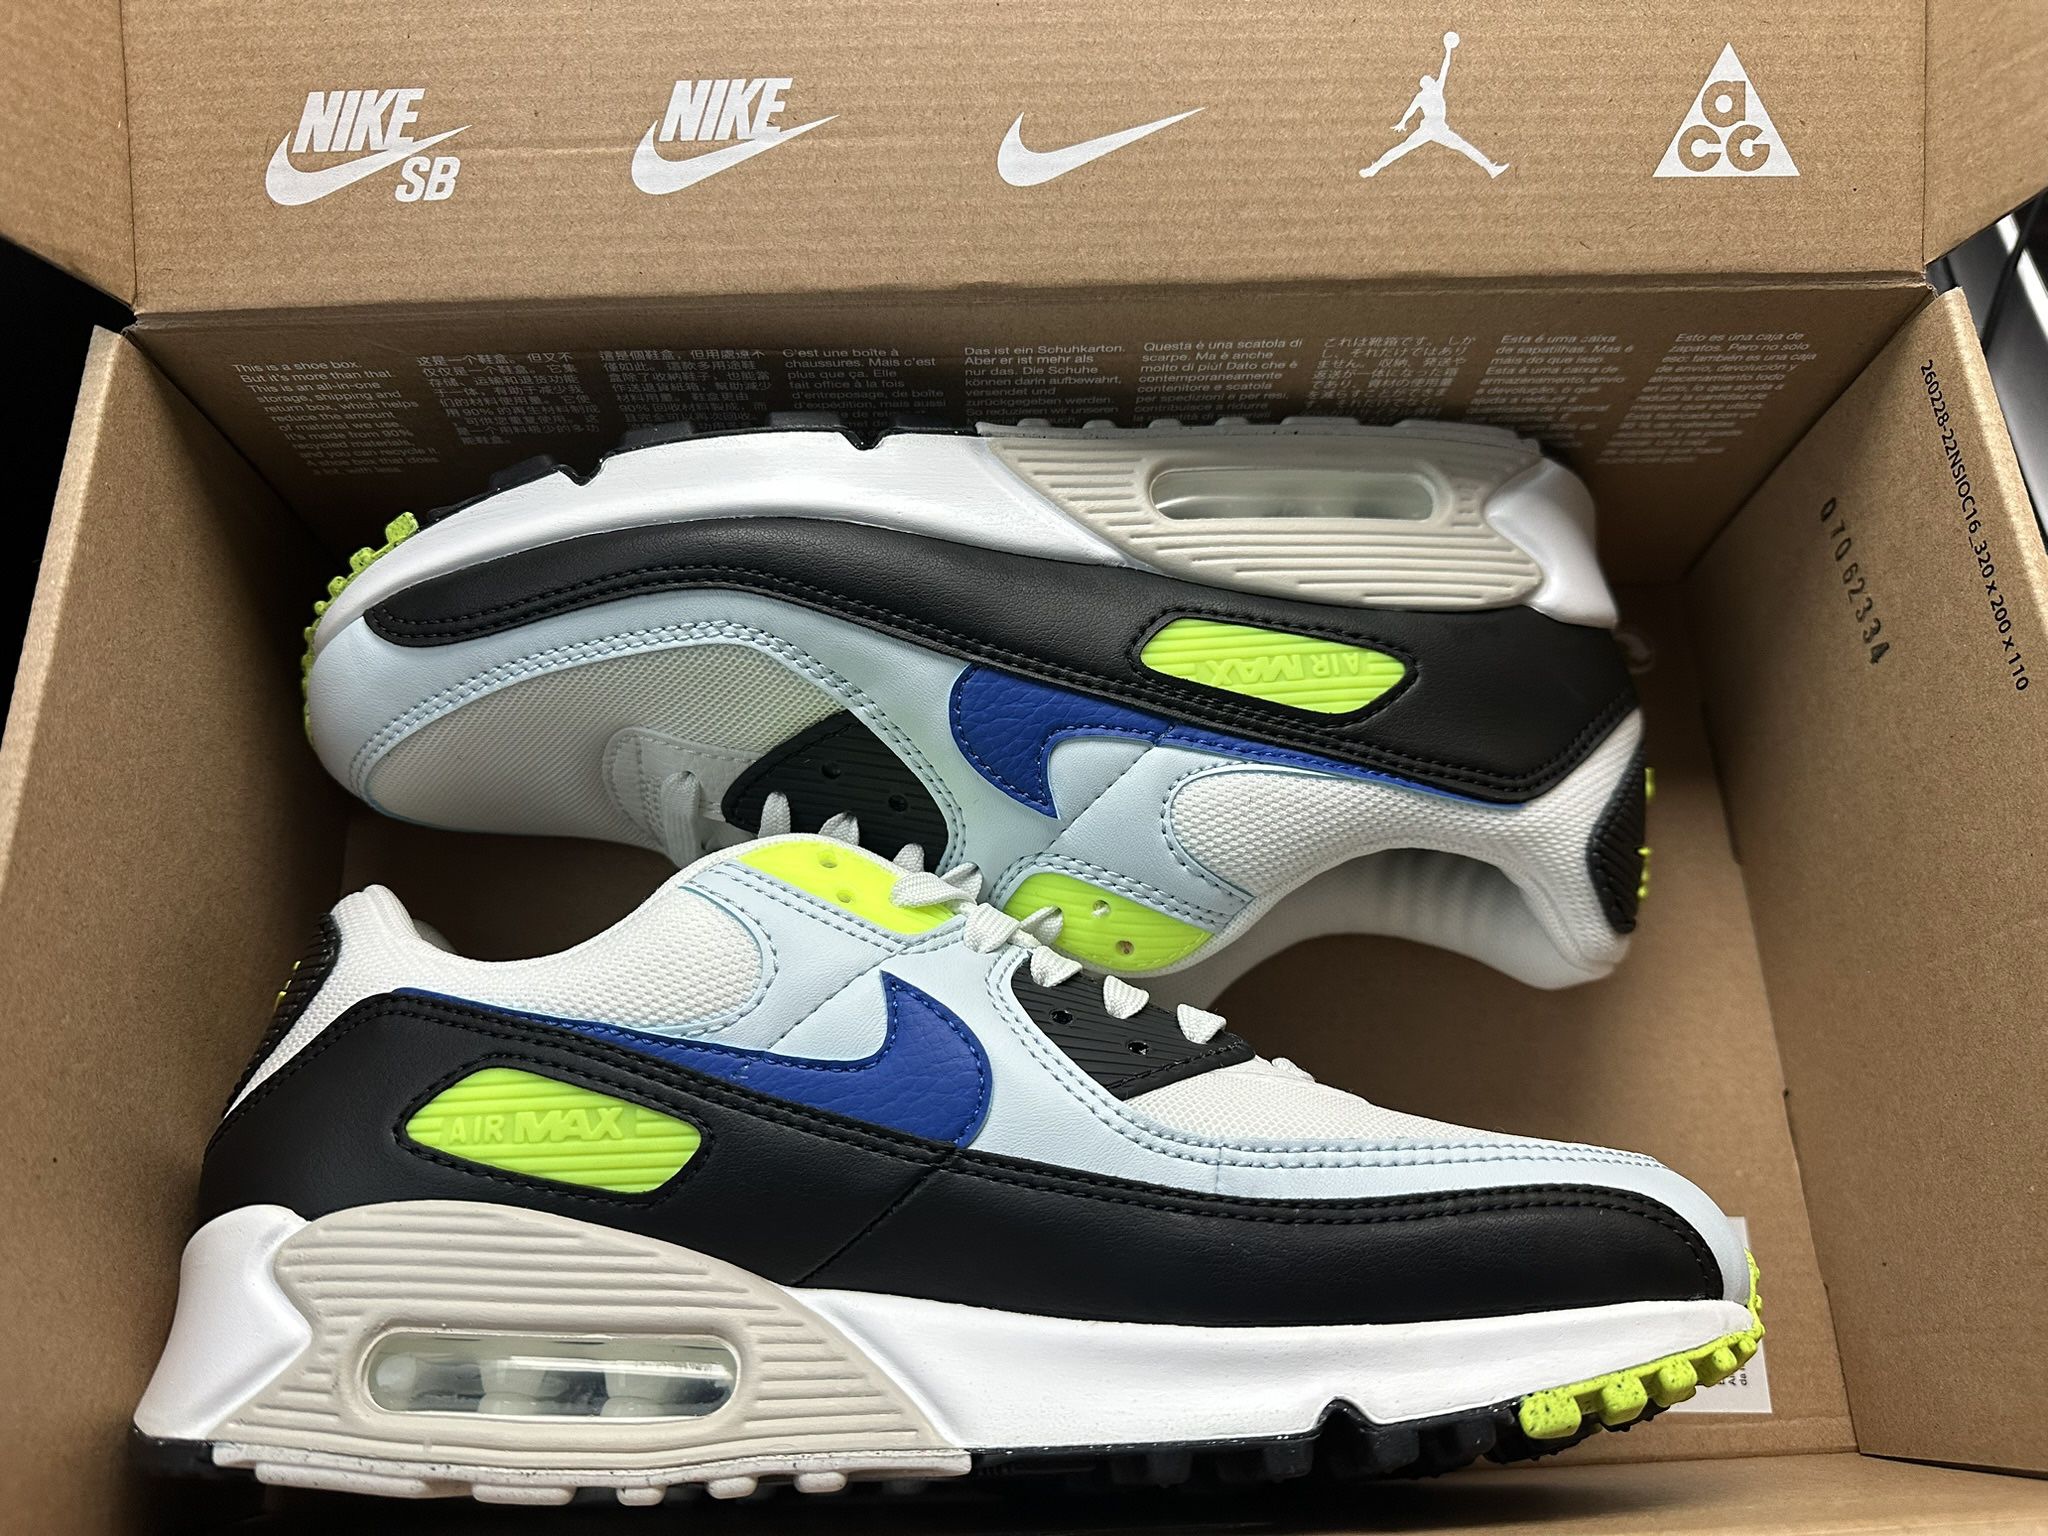 Air Max 90 Brand New Size 9 Women